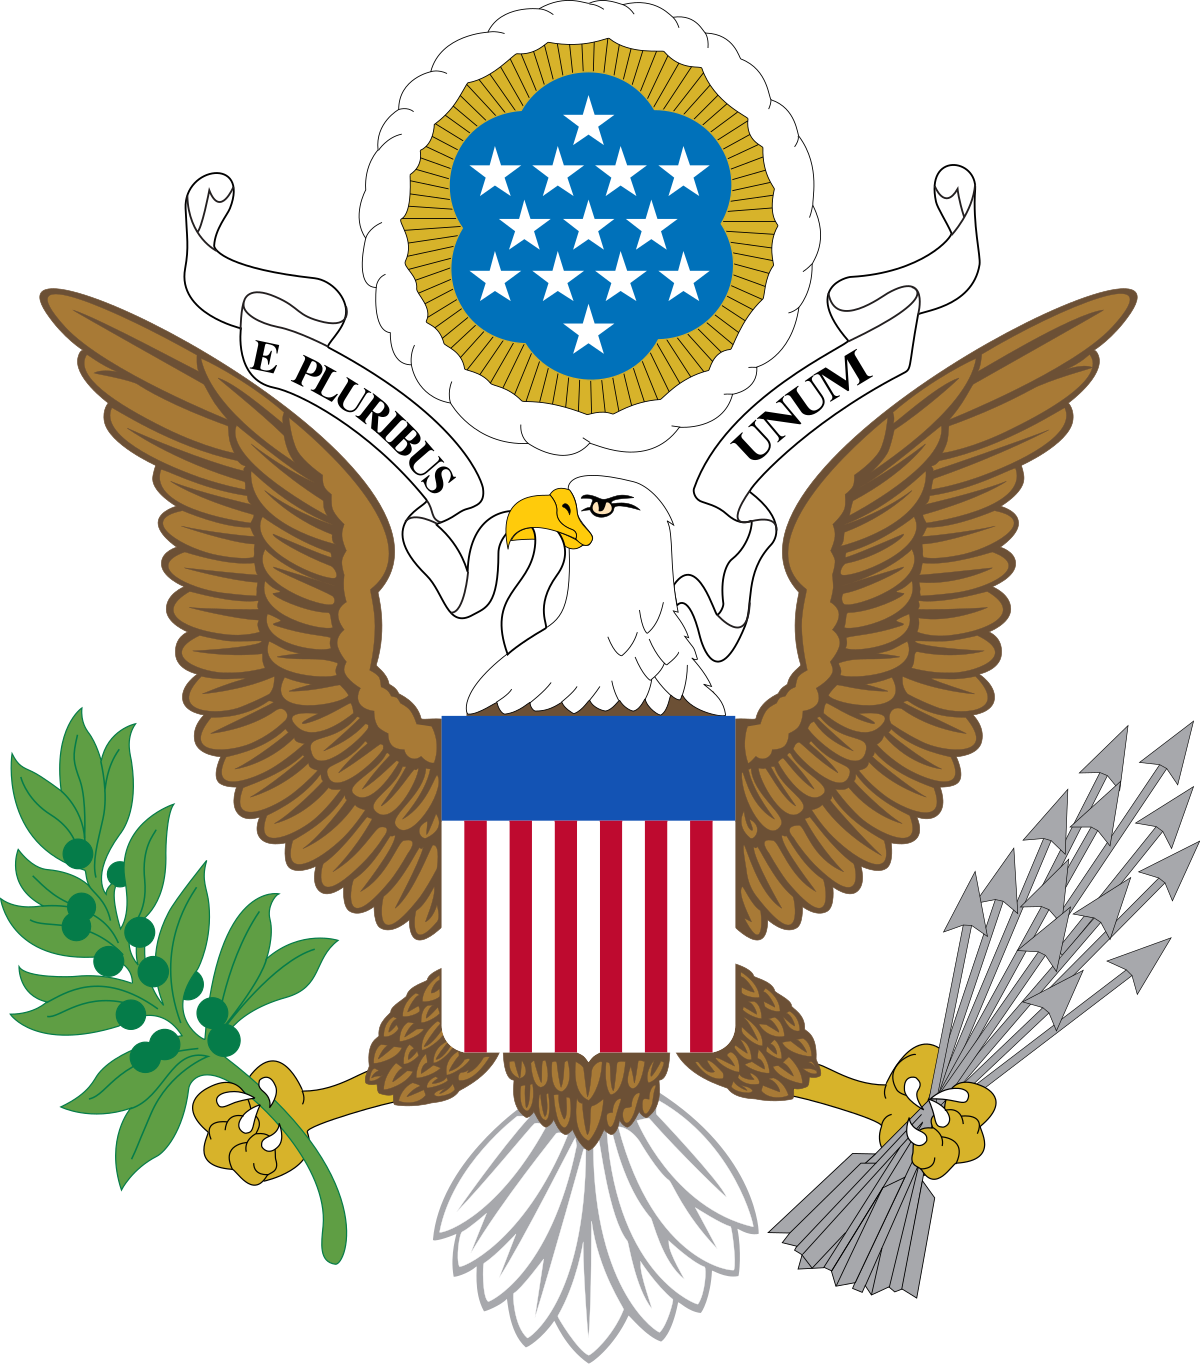 File:Badge of the United States Diplomatic Security Service.svg - Wikipedia